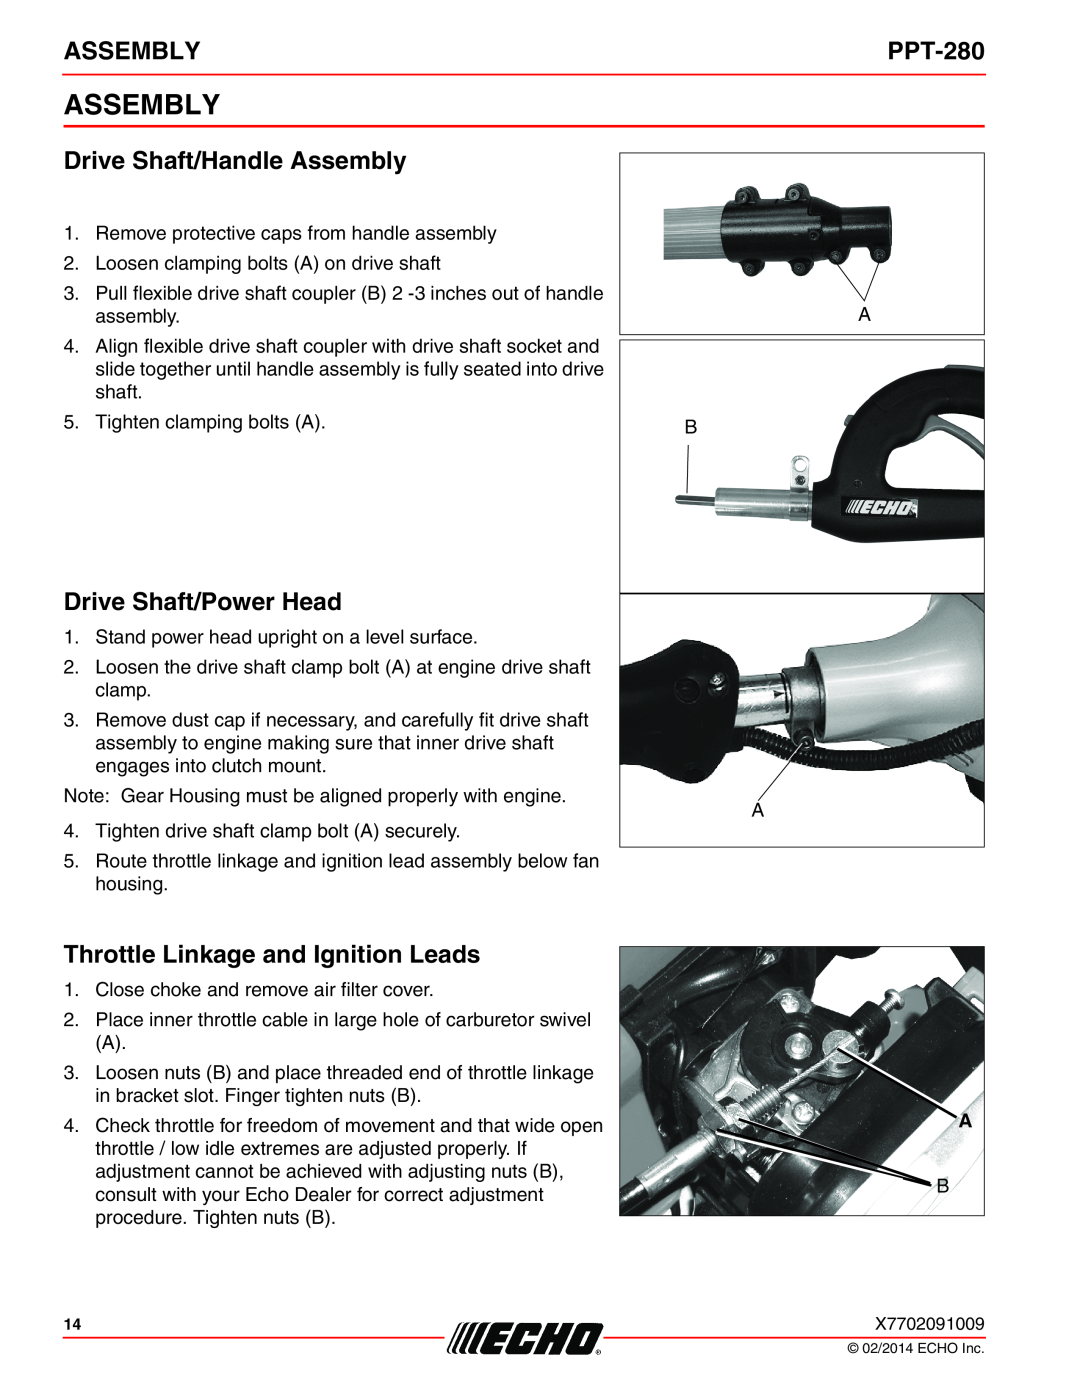 Echo PPT-280 specifications Drive Shaft/Handle Assembly, Drive Shaft/Power Head, Throttle Linkage and Ignition Leads 